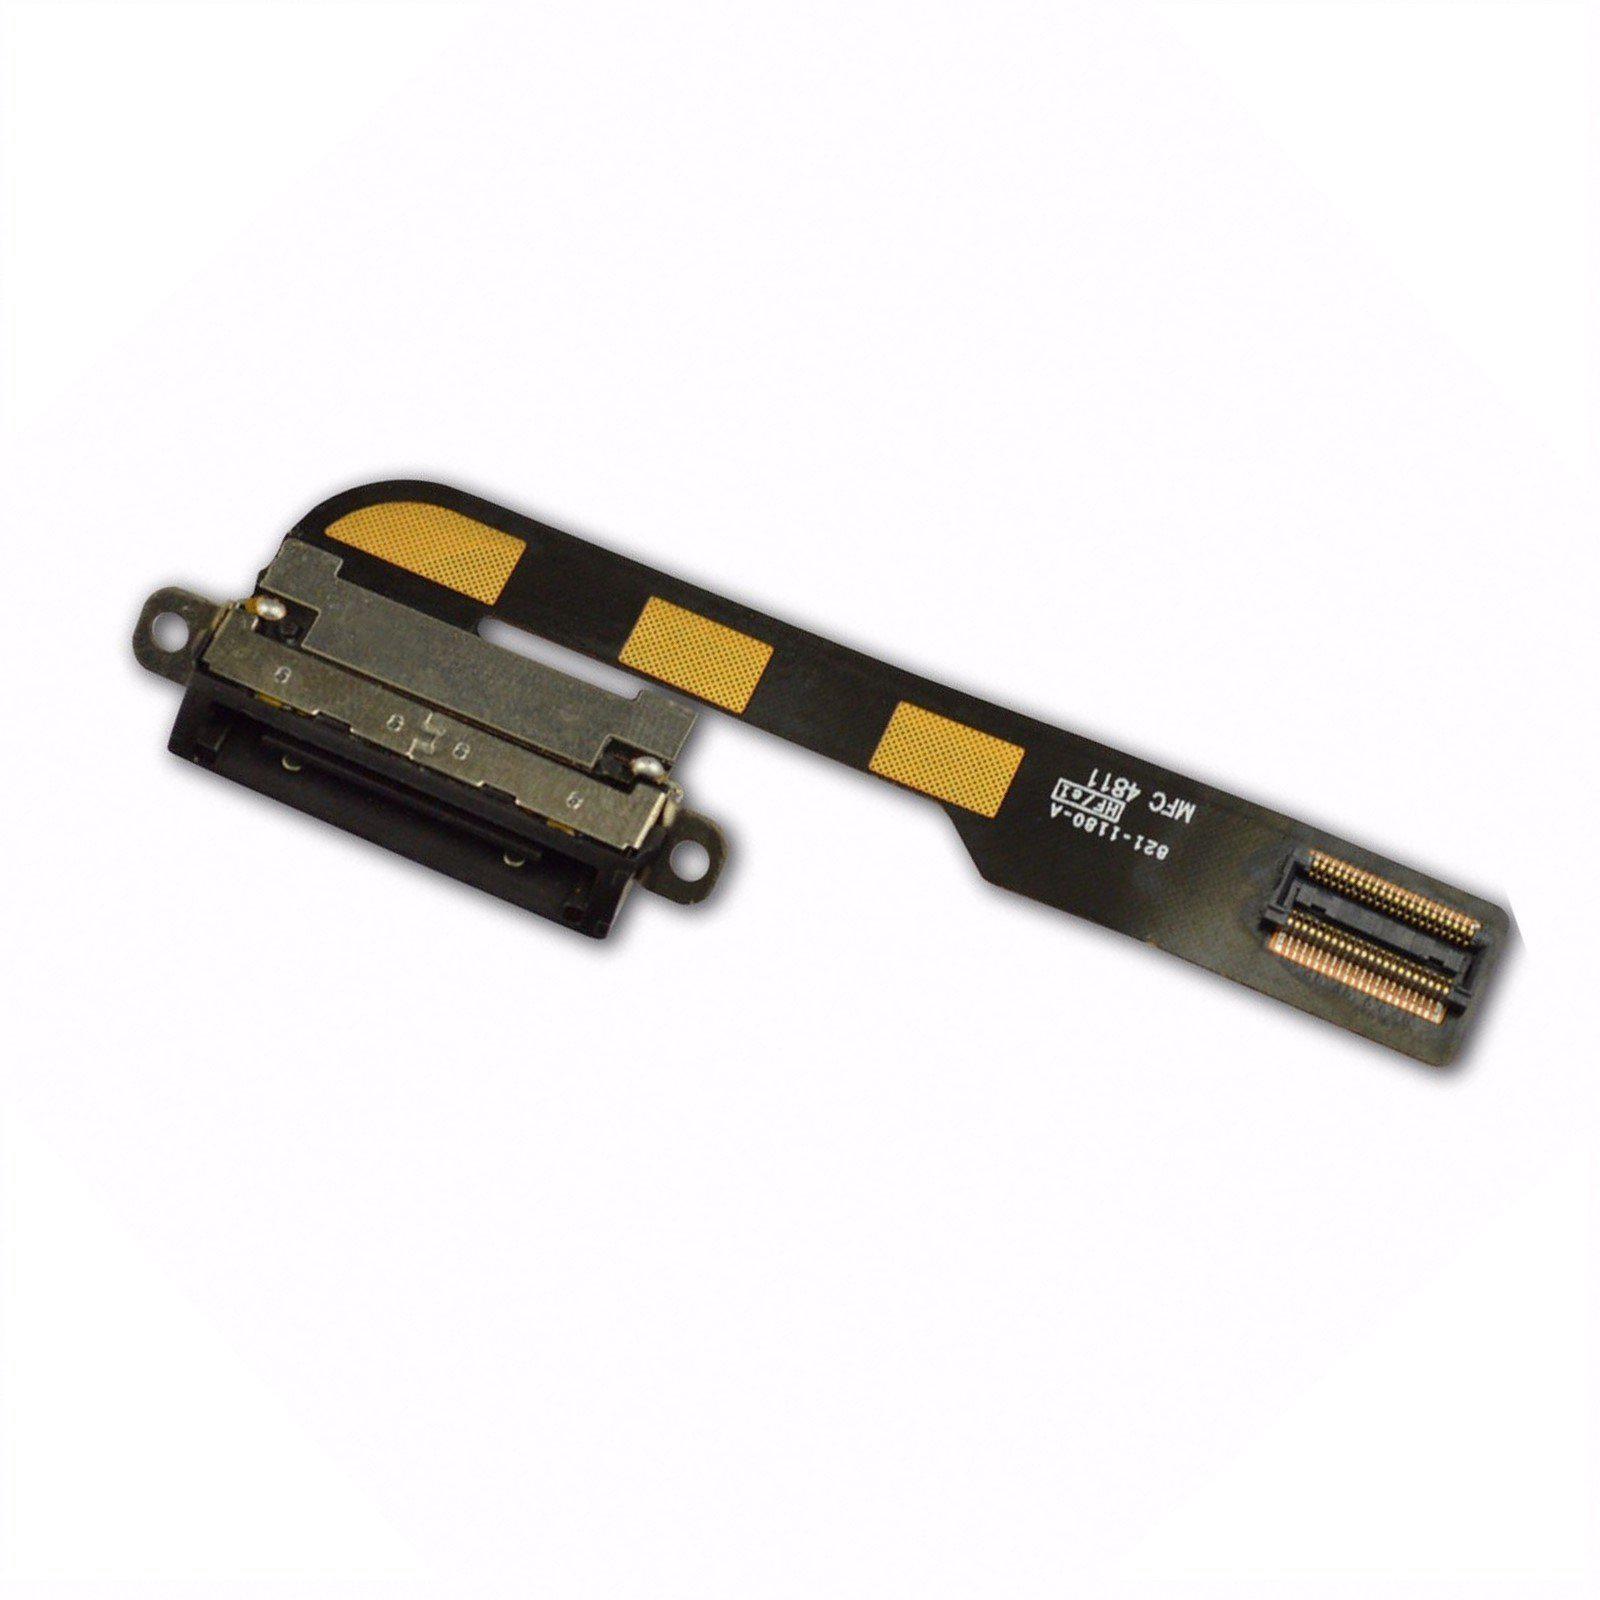 Apple iPad 2 Charging Port Flex Cable for [product_price] - First Help Tech